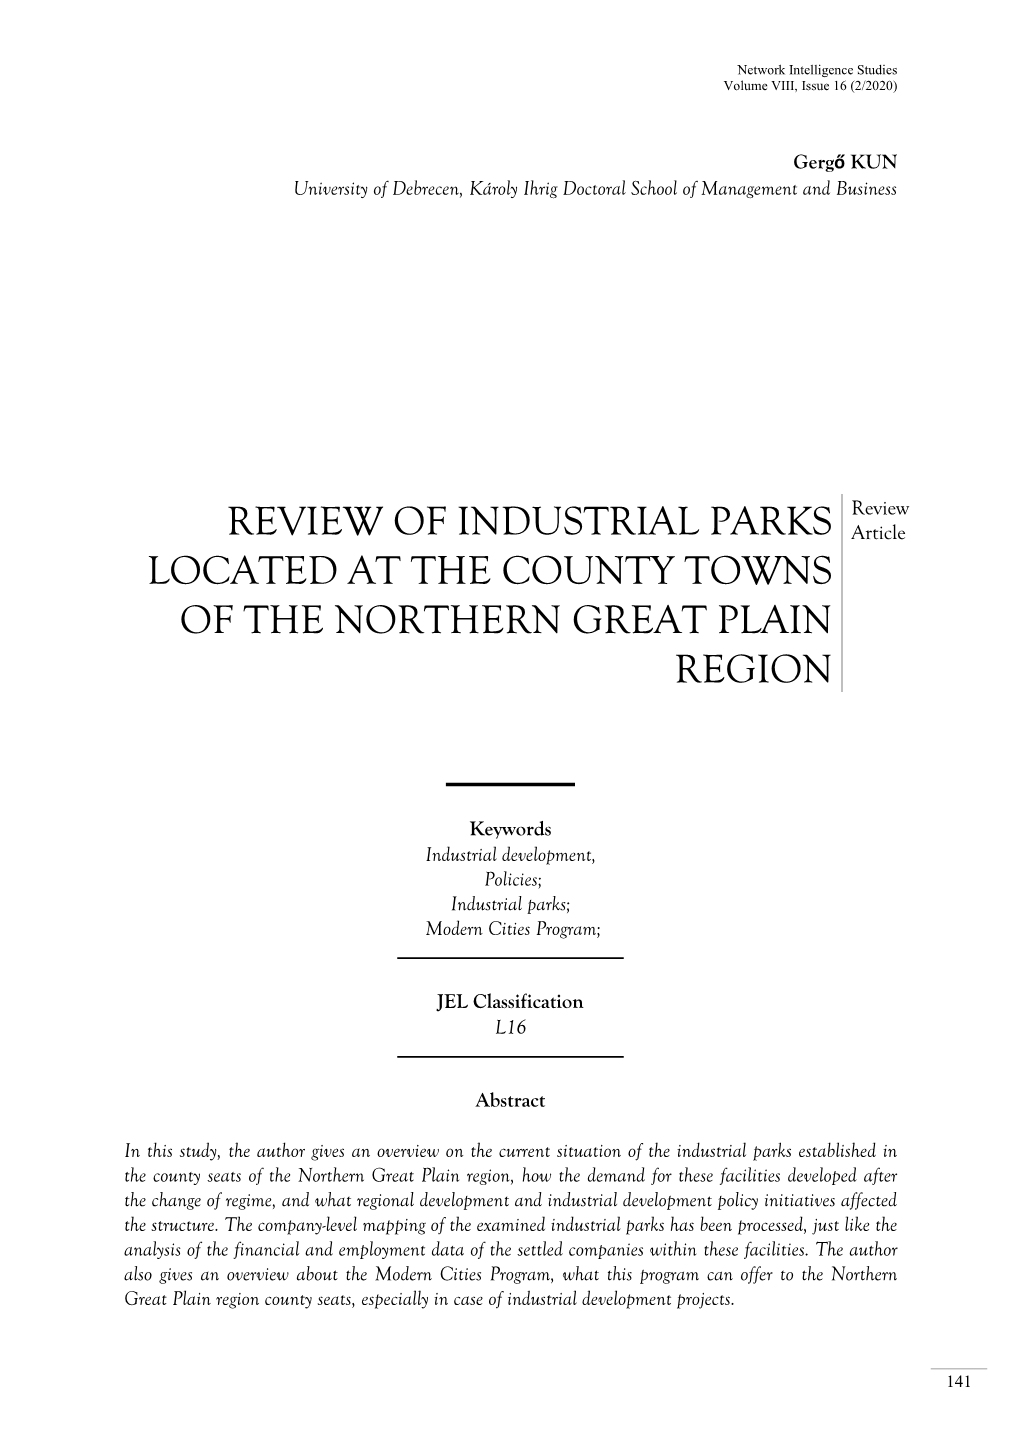 Review of Industrial Parks Located at the County Towns of the Northern Great Plain Region